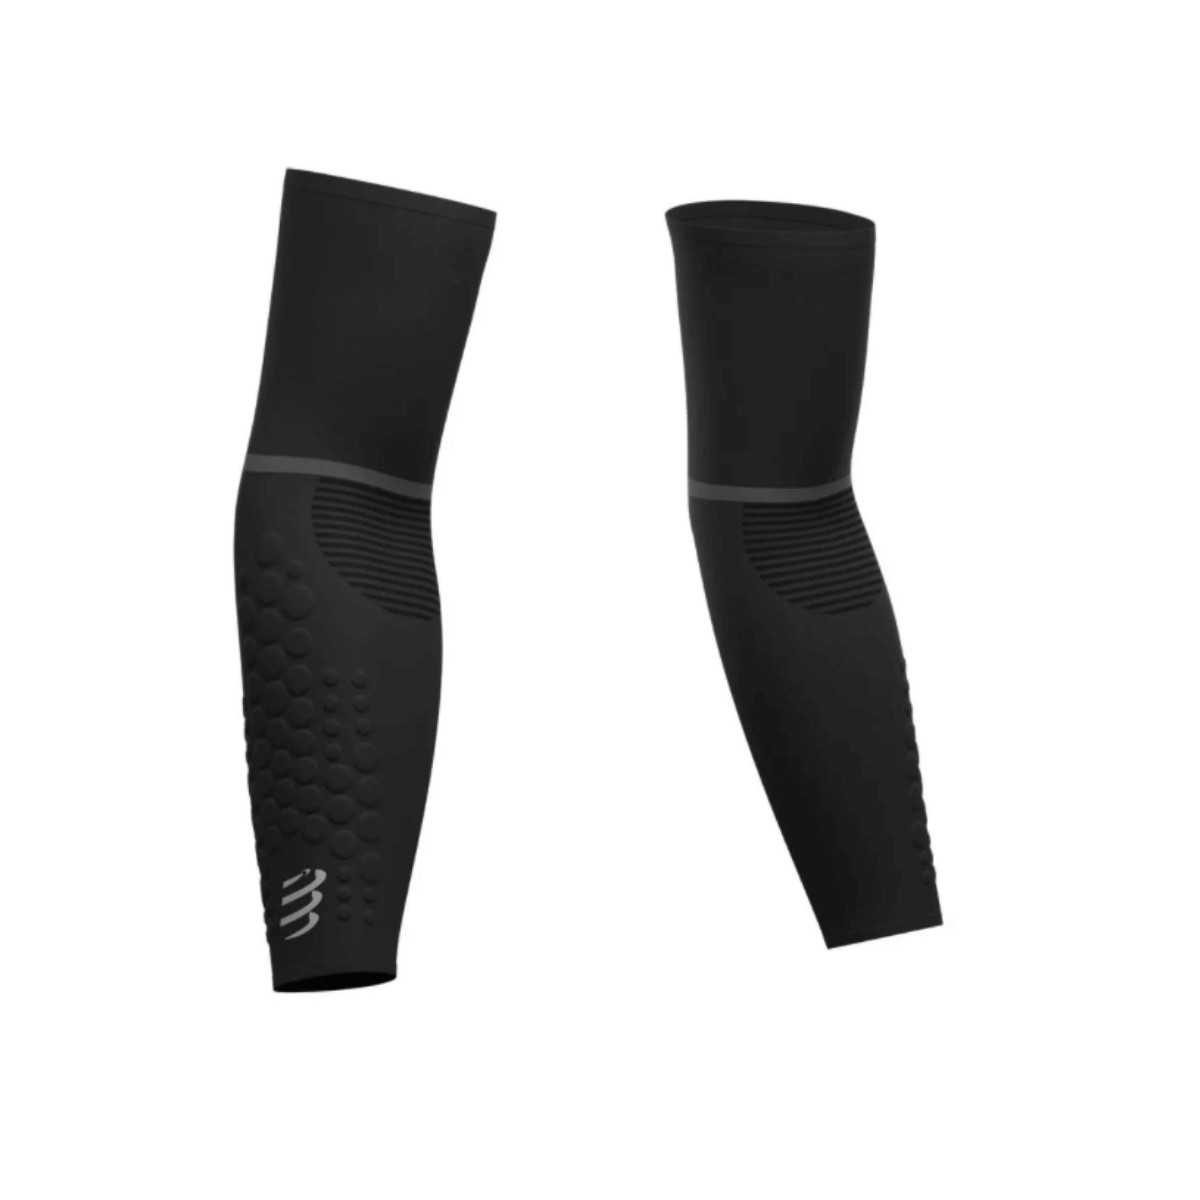 Compressport Arm Force Ultralight Sleeves Black, Size Size 3